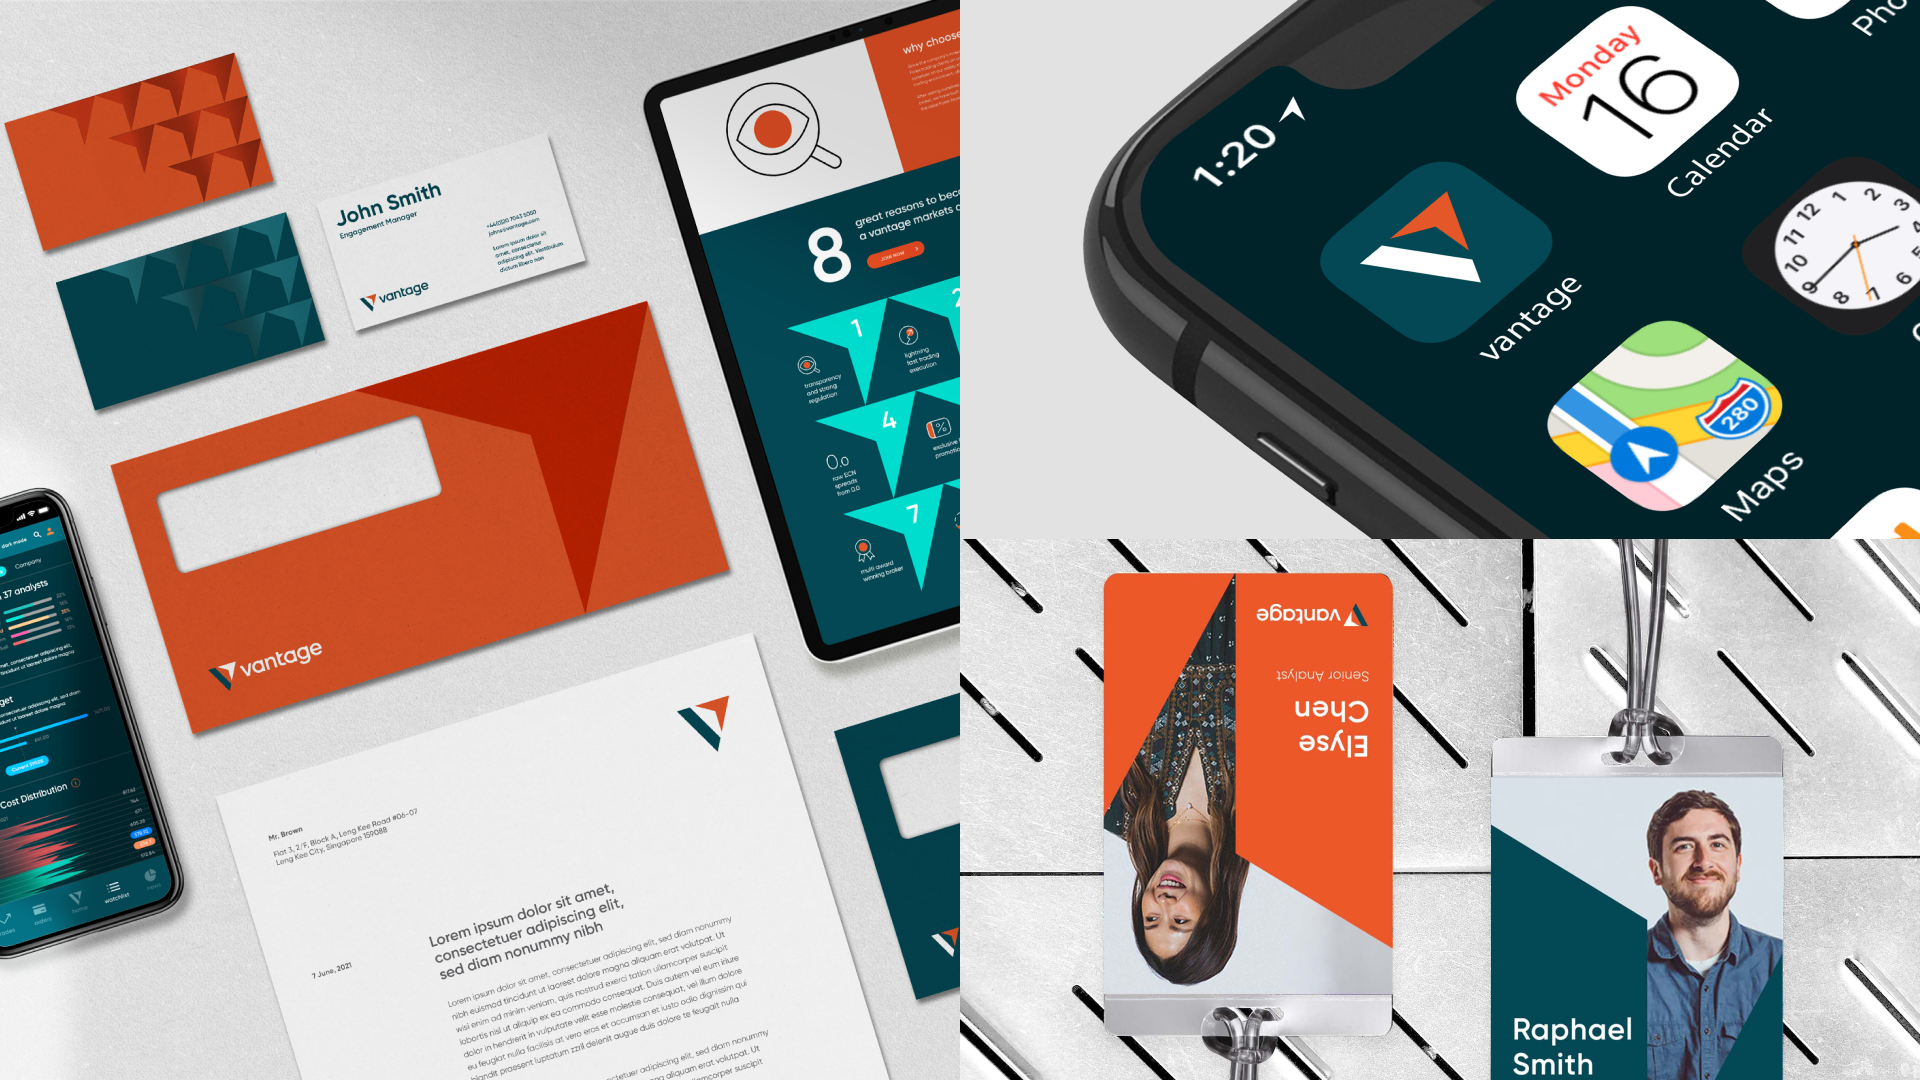 Compilation of stationery mock up, iPhone icon close up, and staff ID badges